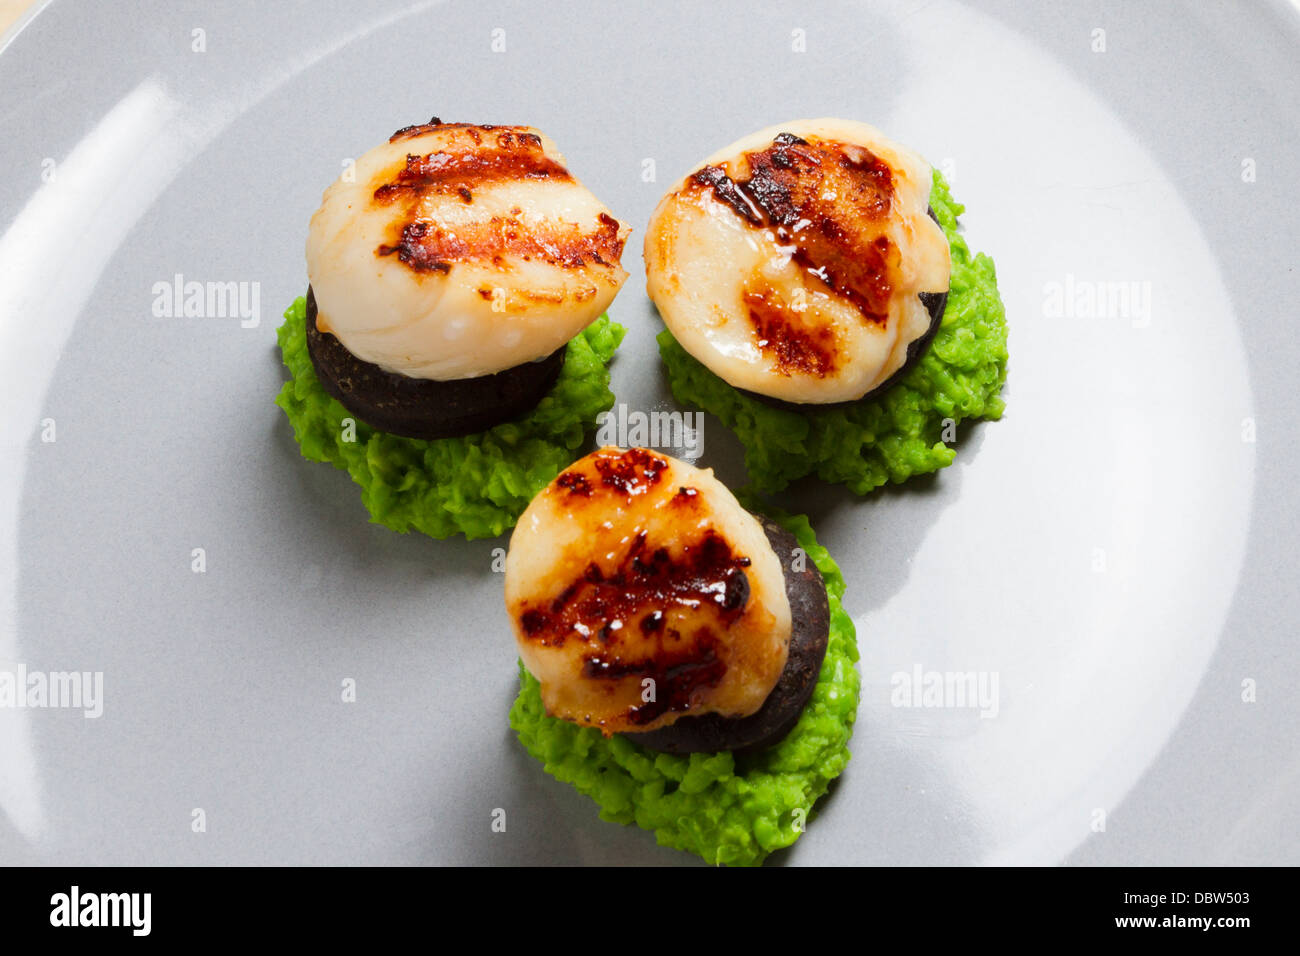 Starter dish of seared scallops/scallop,black pudding and crushed/mushy peas on a plate Stock Photo